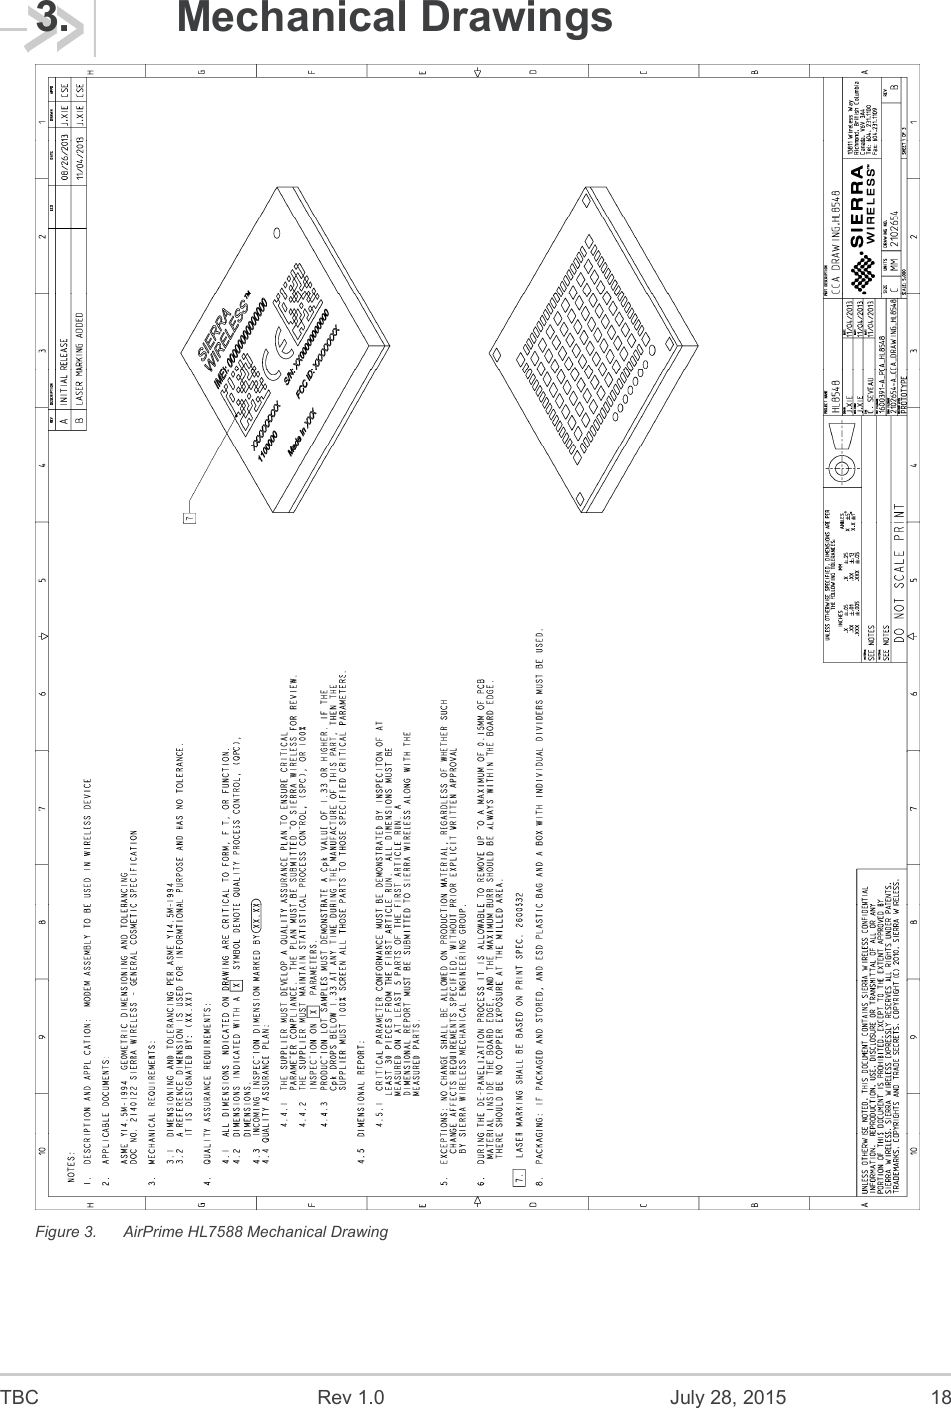  TBC  Rev 1.0  July 28, 2015  18 3.  Mechanical Drawings  Figure 3.  AirPrime HL7588 Mechanical Drawing 